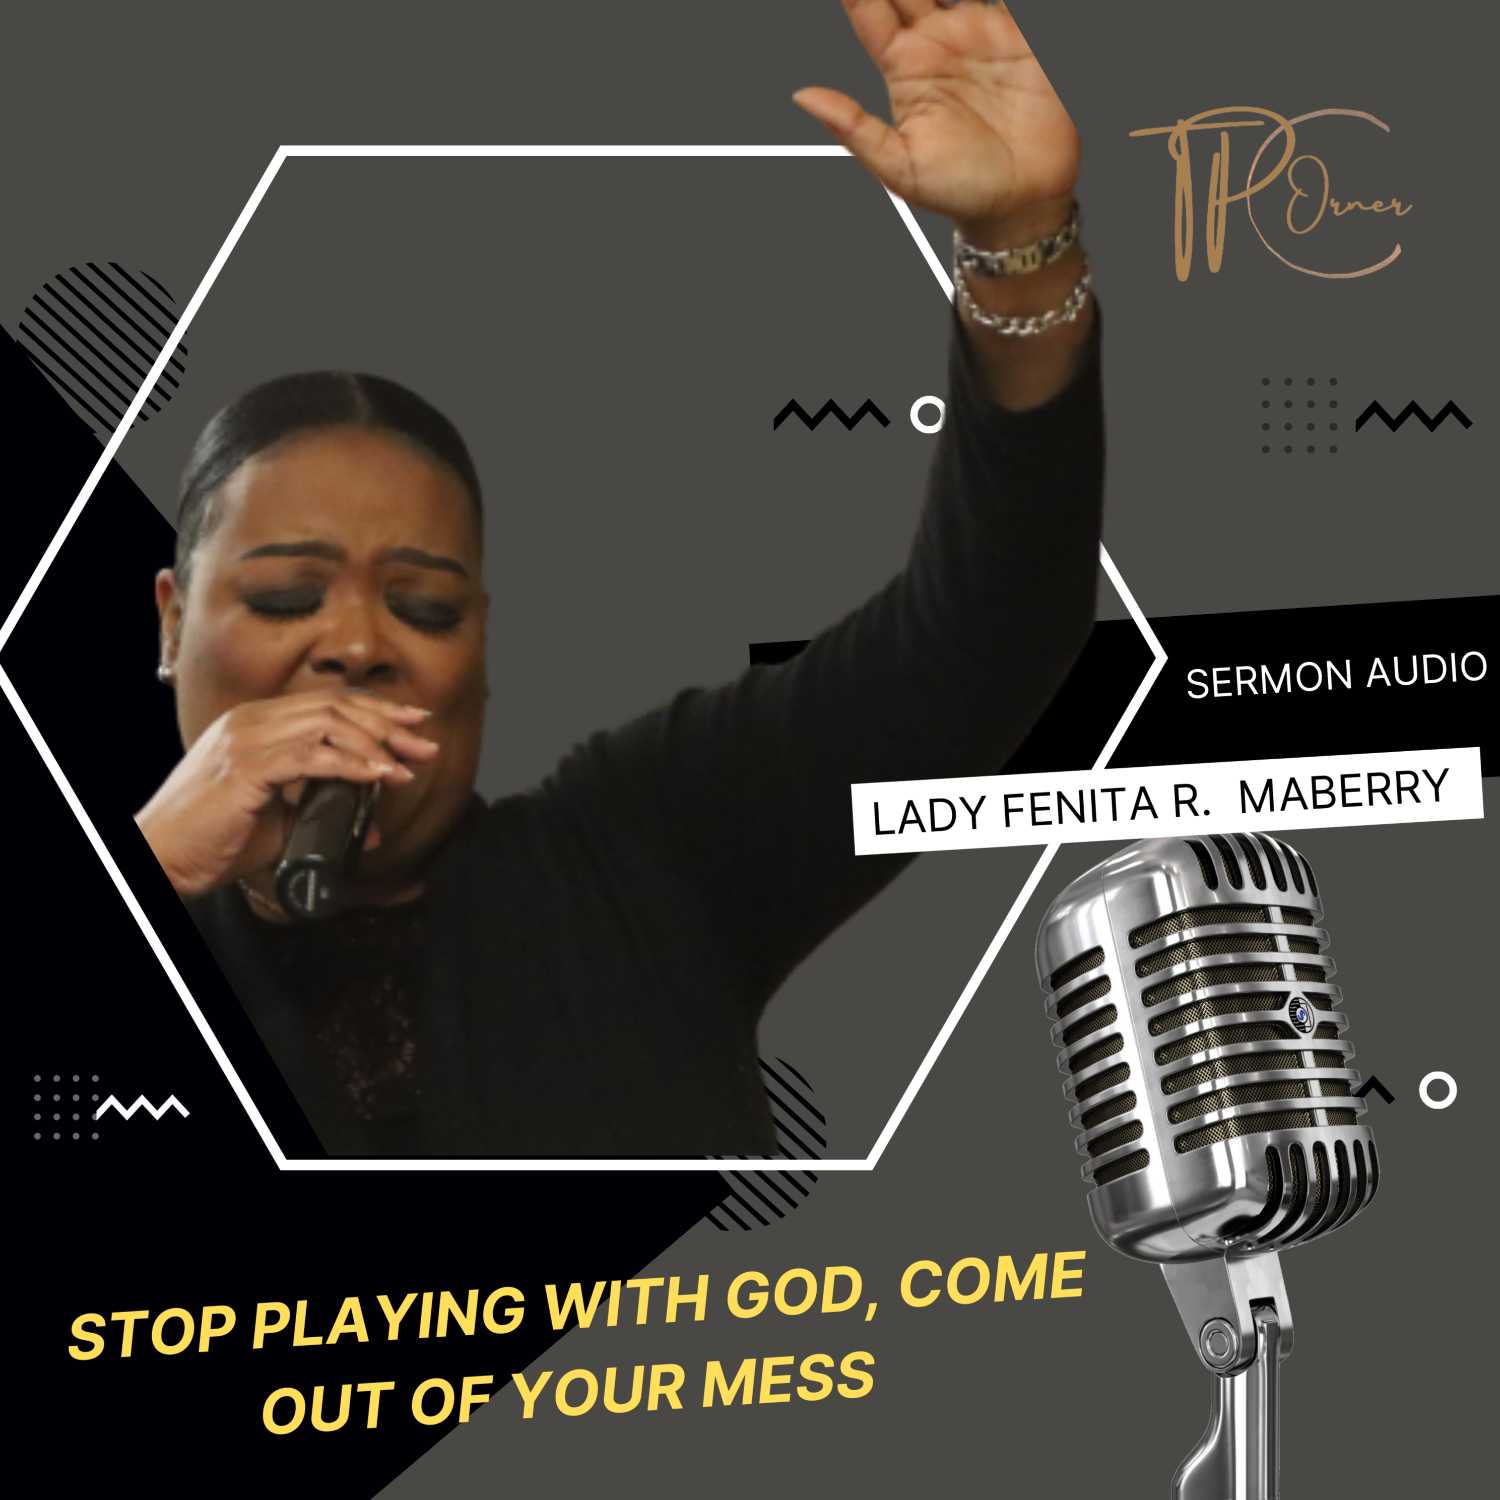 STOP PLAYING  WITH GOD,  COME OUT OF YOUR MESS - LADY FENITA R MABERRY SERMON AUDIO ES:33